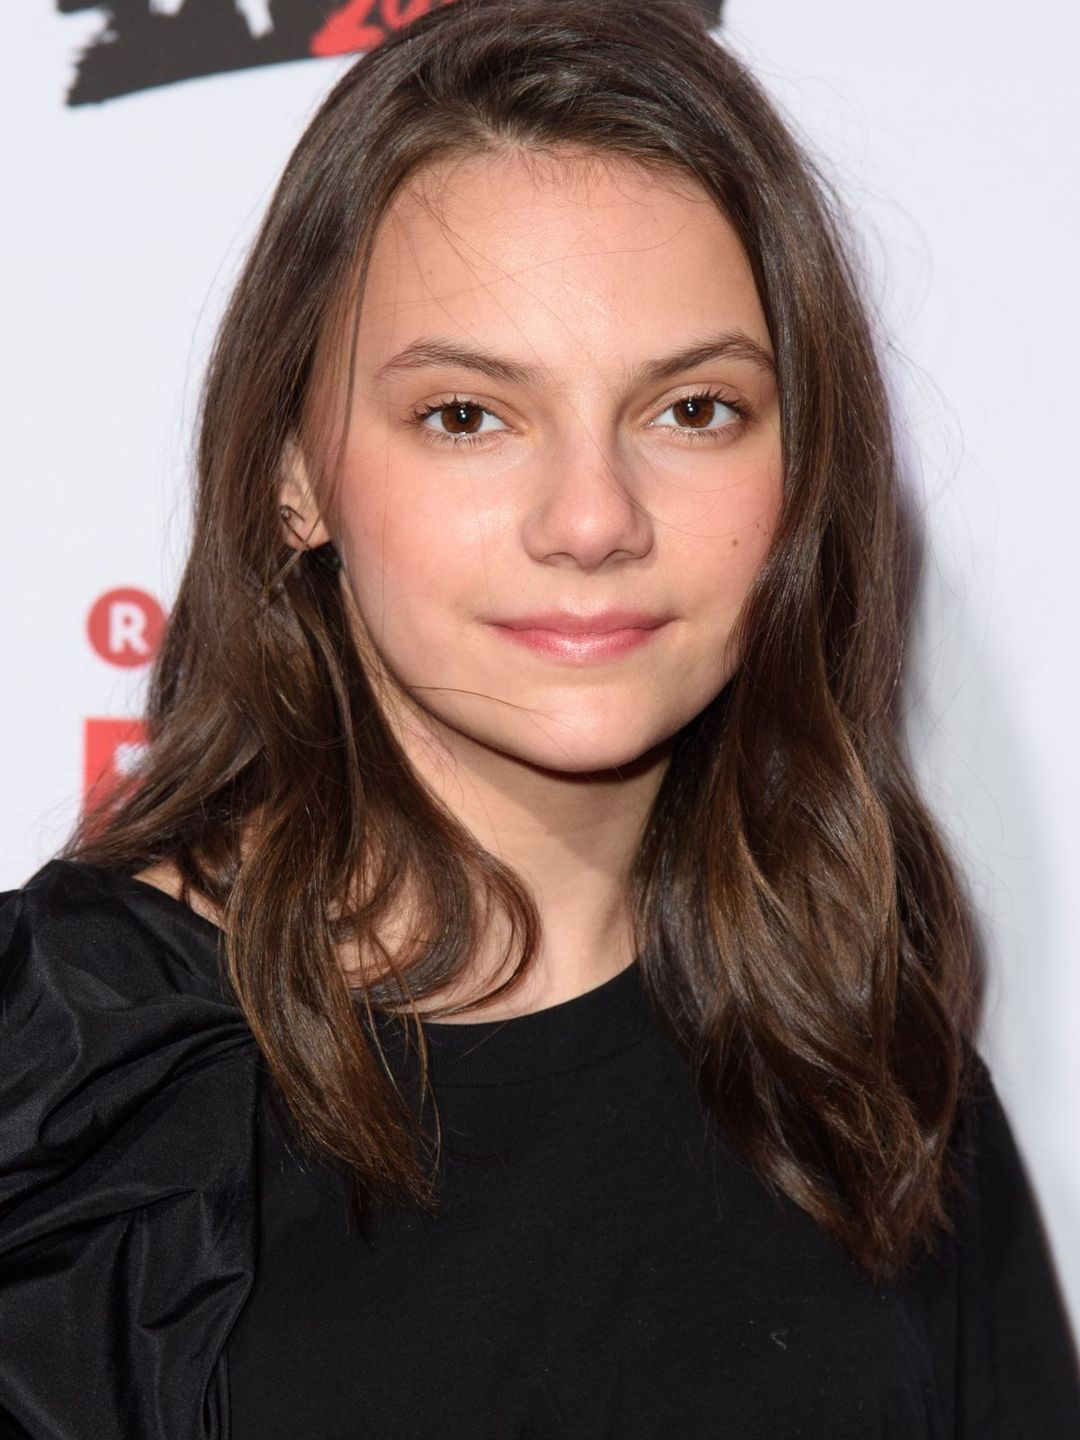 Dafne Keen how did she became famous